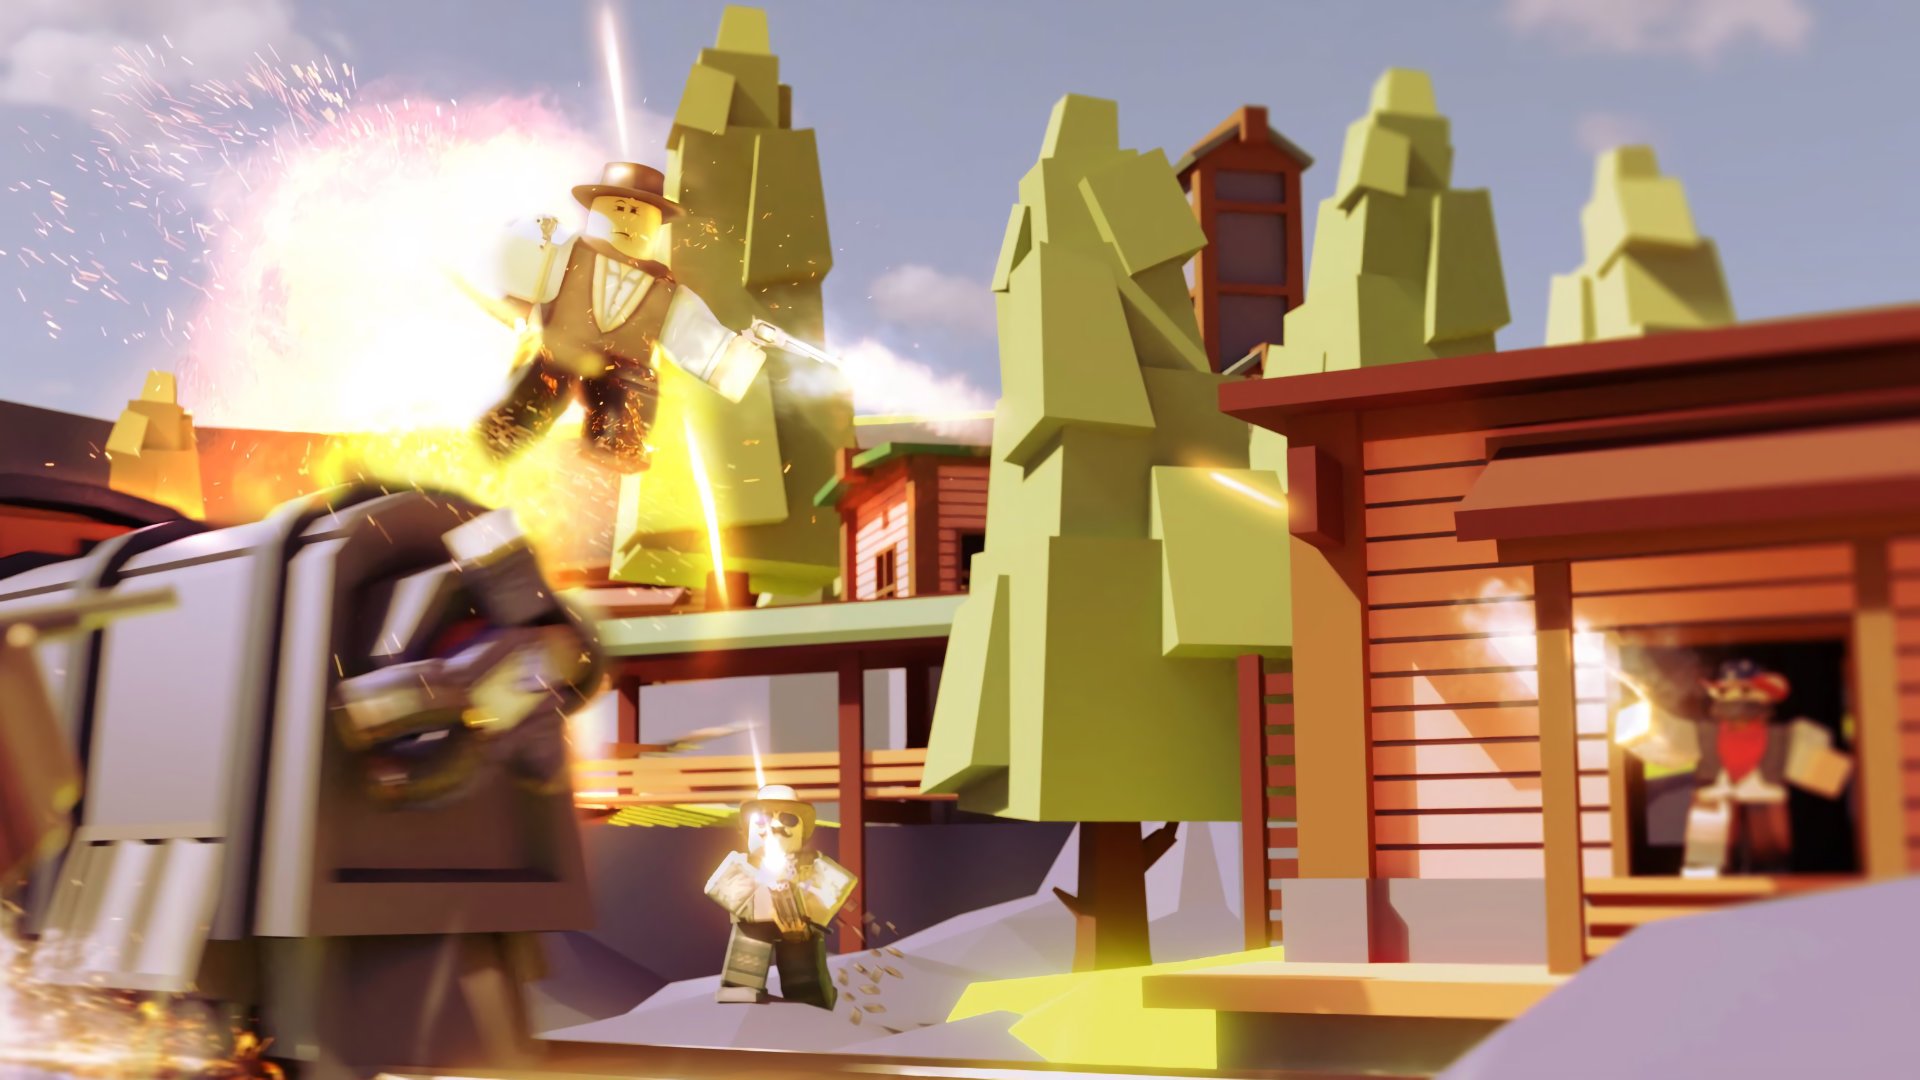 Roblox Shootout codes (February 2023): Free Gems, Skins, and more